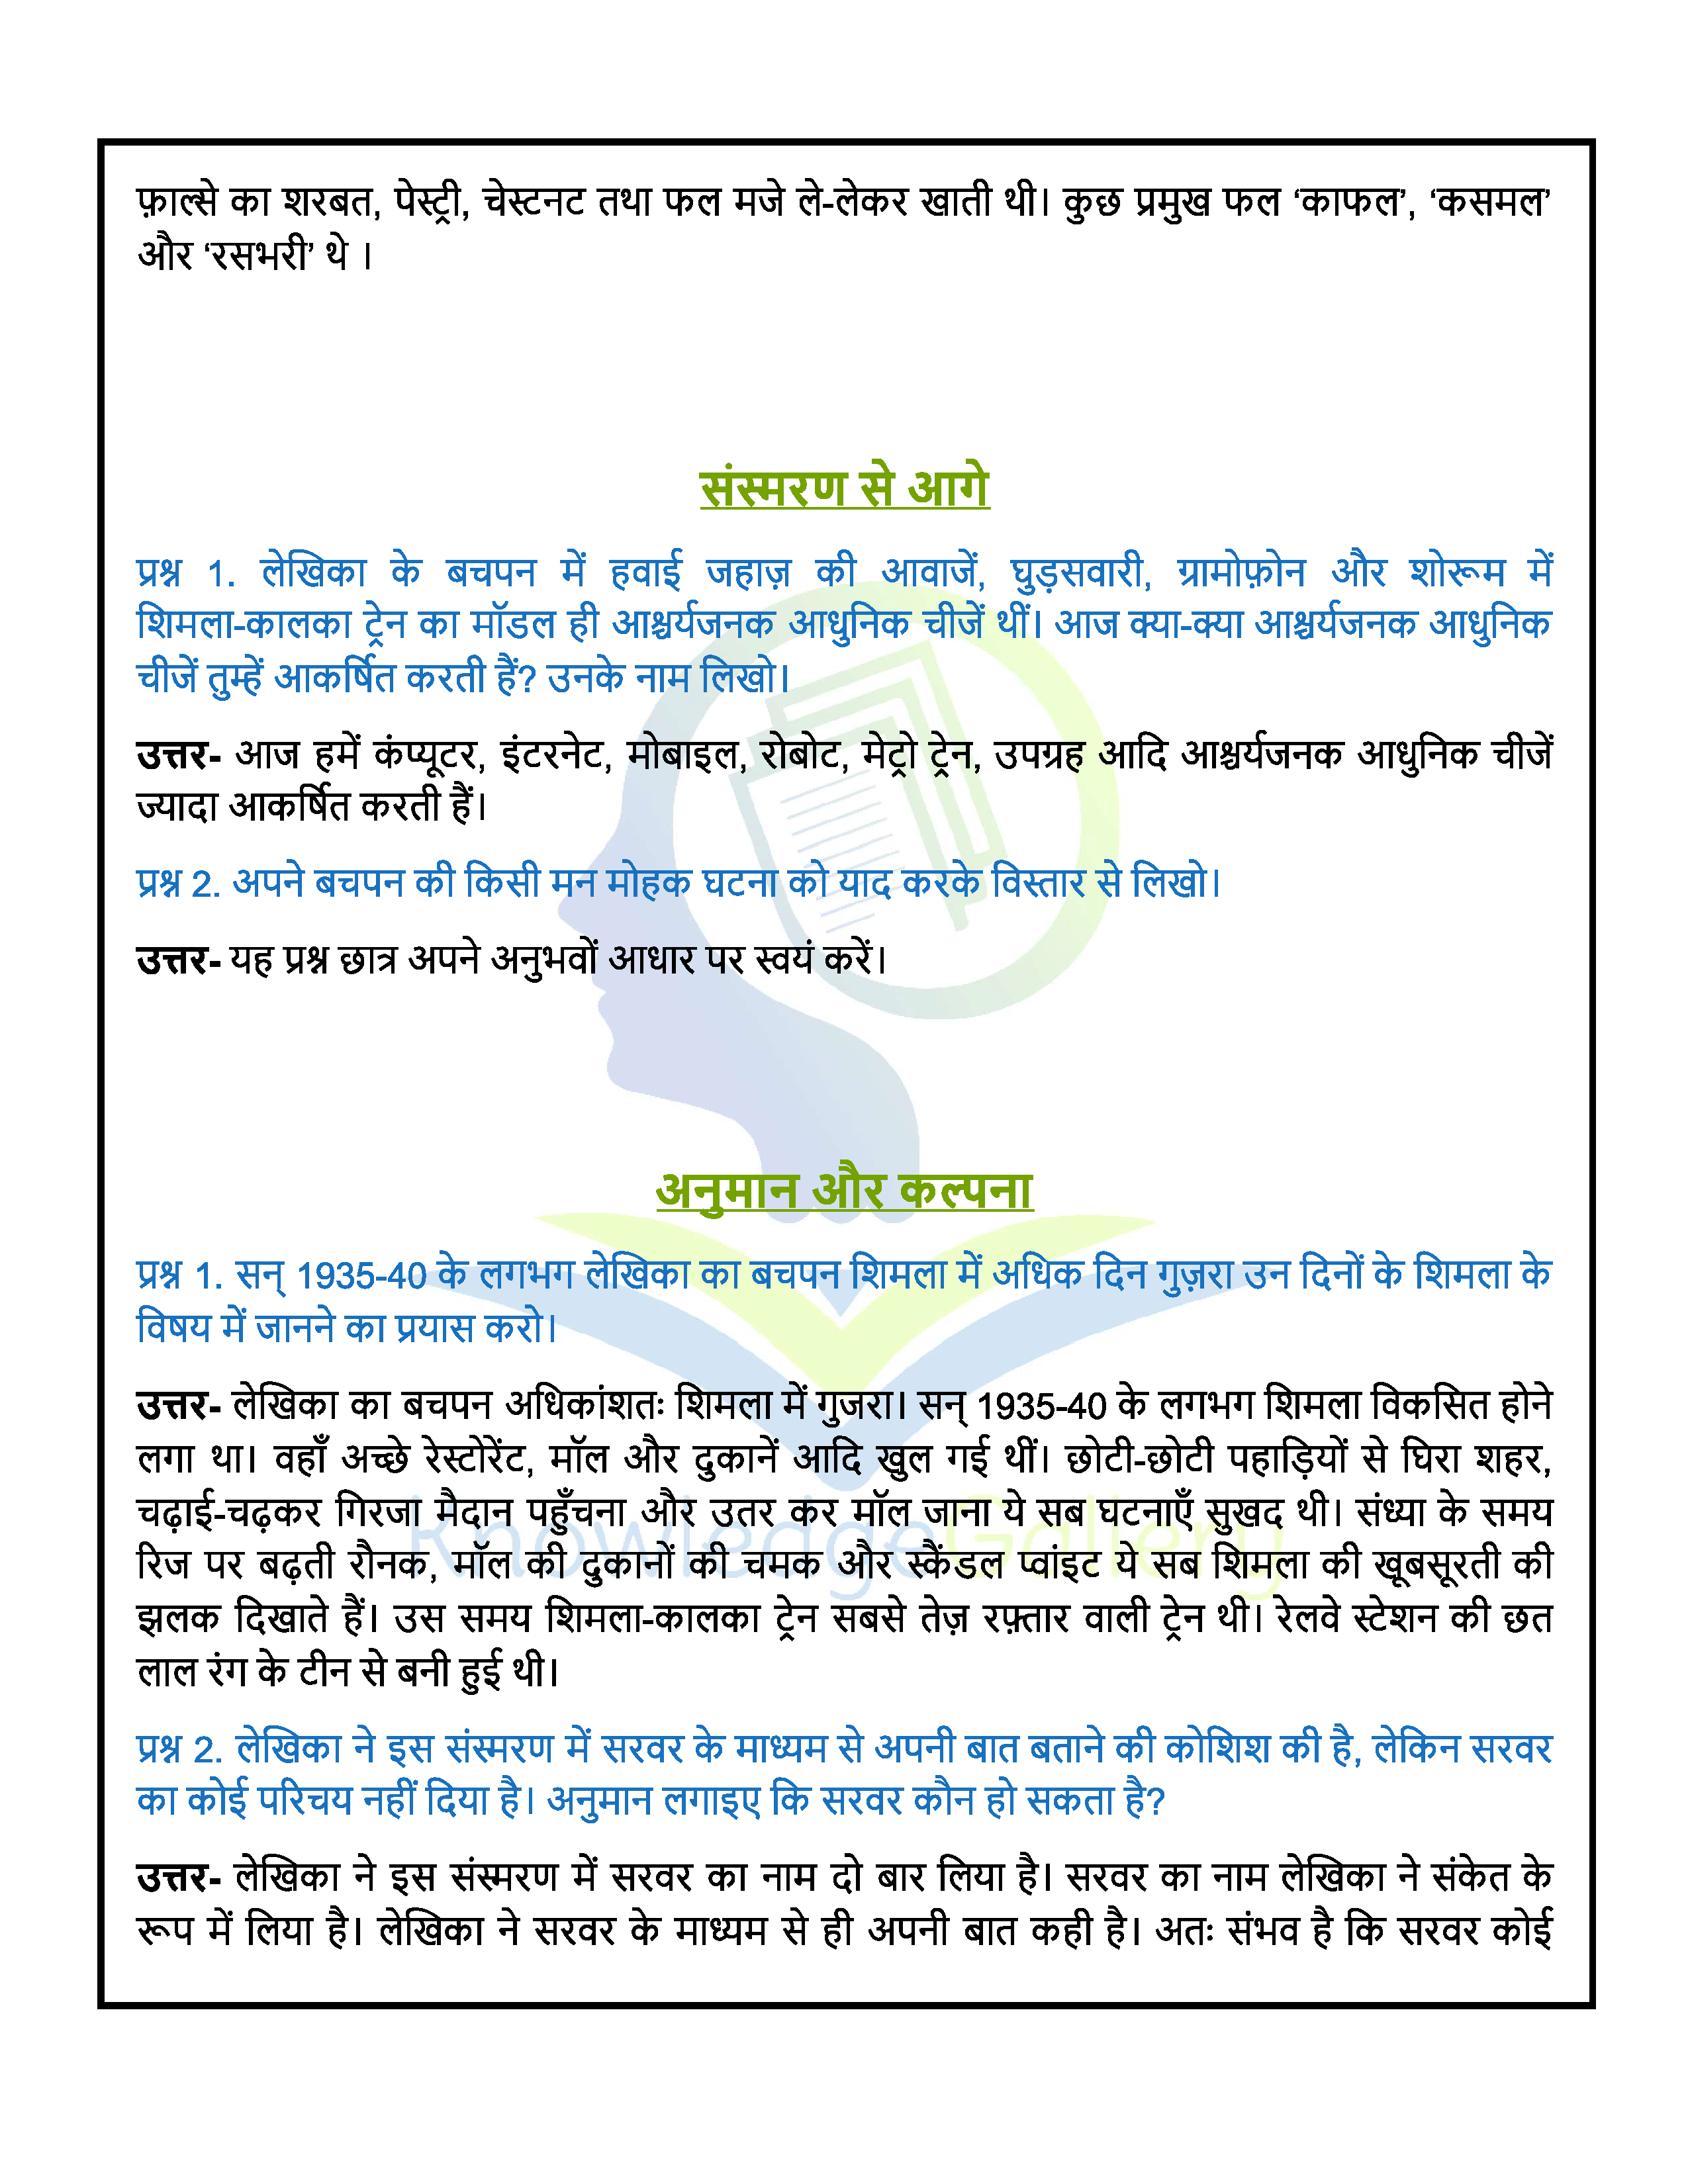 NCERT Solution For Class 6 Hindi Chapter 2 part 2